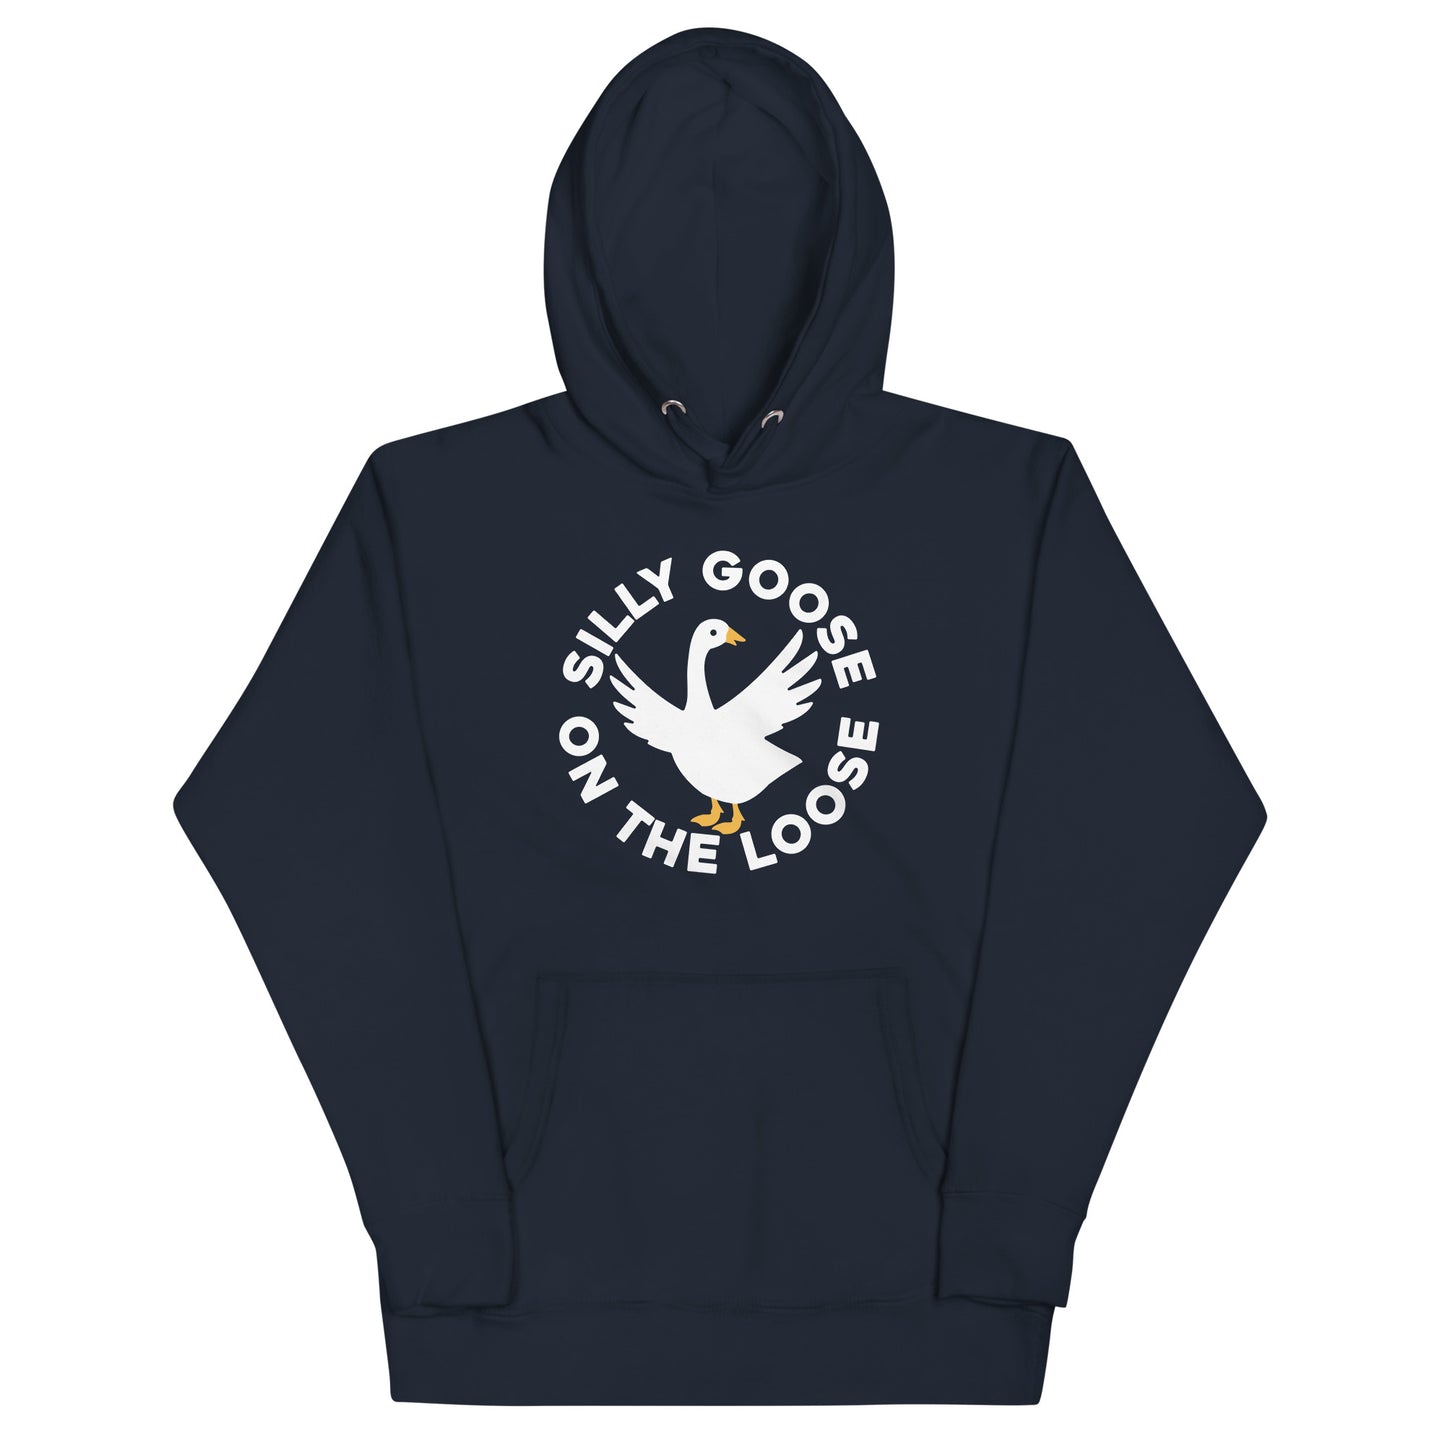 Silly Goose On The Loose Unisex Hoodie